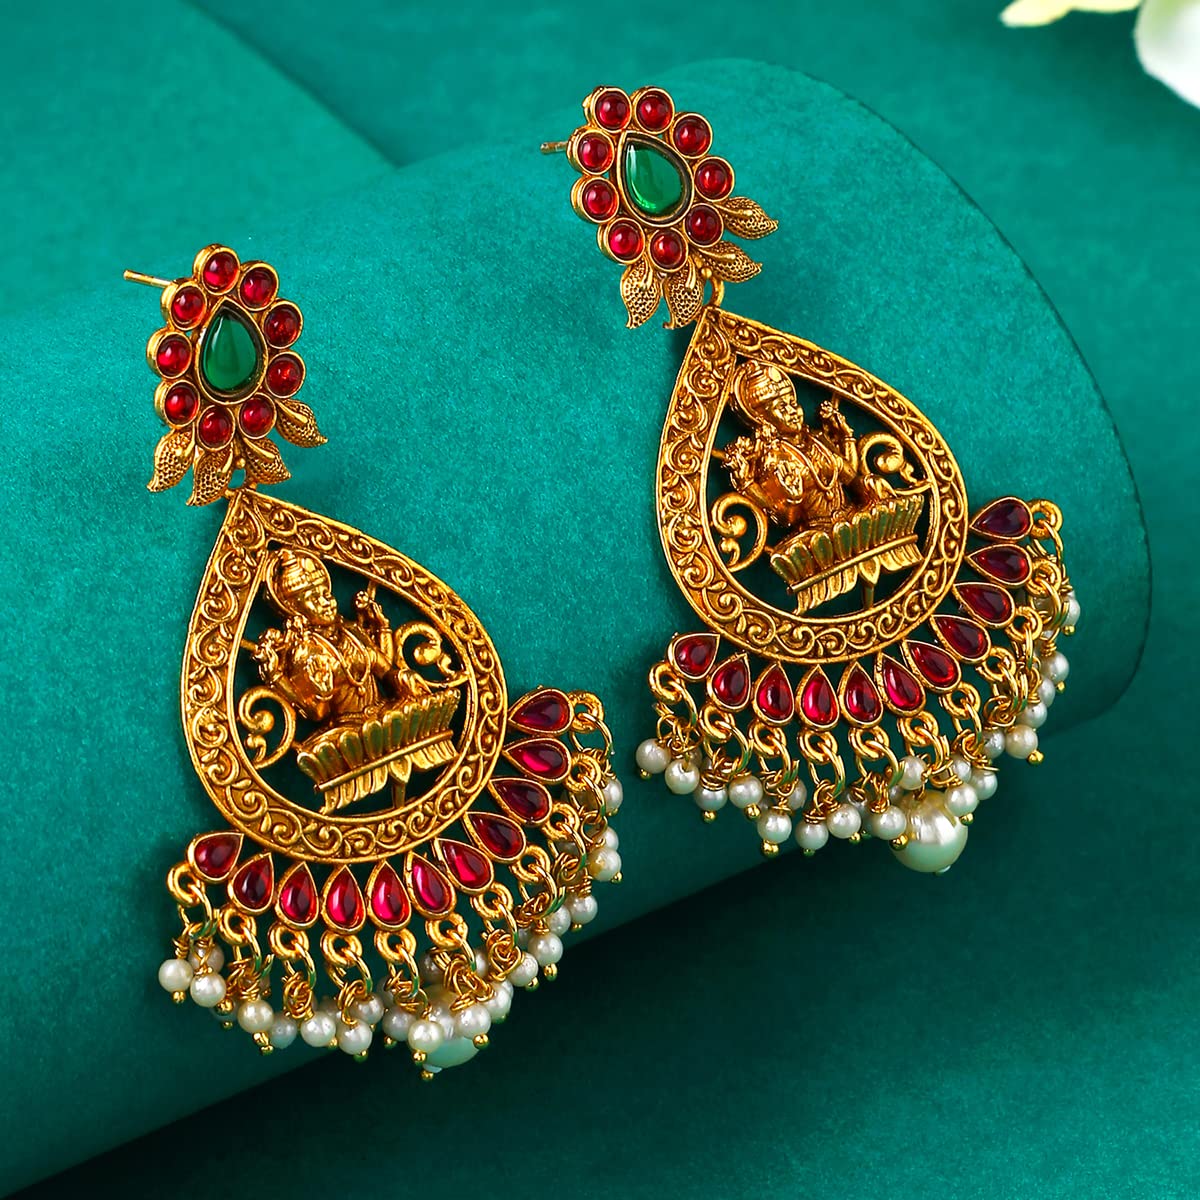 Yellow Chimes Earrings for Women and Girls Traditional Chandbali Earrings Gold Plated | Beads Drop Temple Earrings | Birthday Gift for girls and women Anniversary Gift for Wife (Style 4)